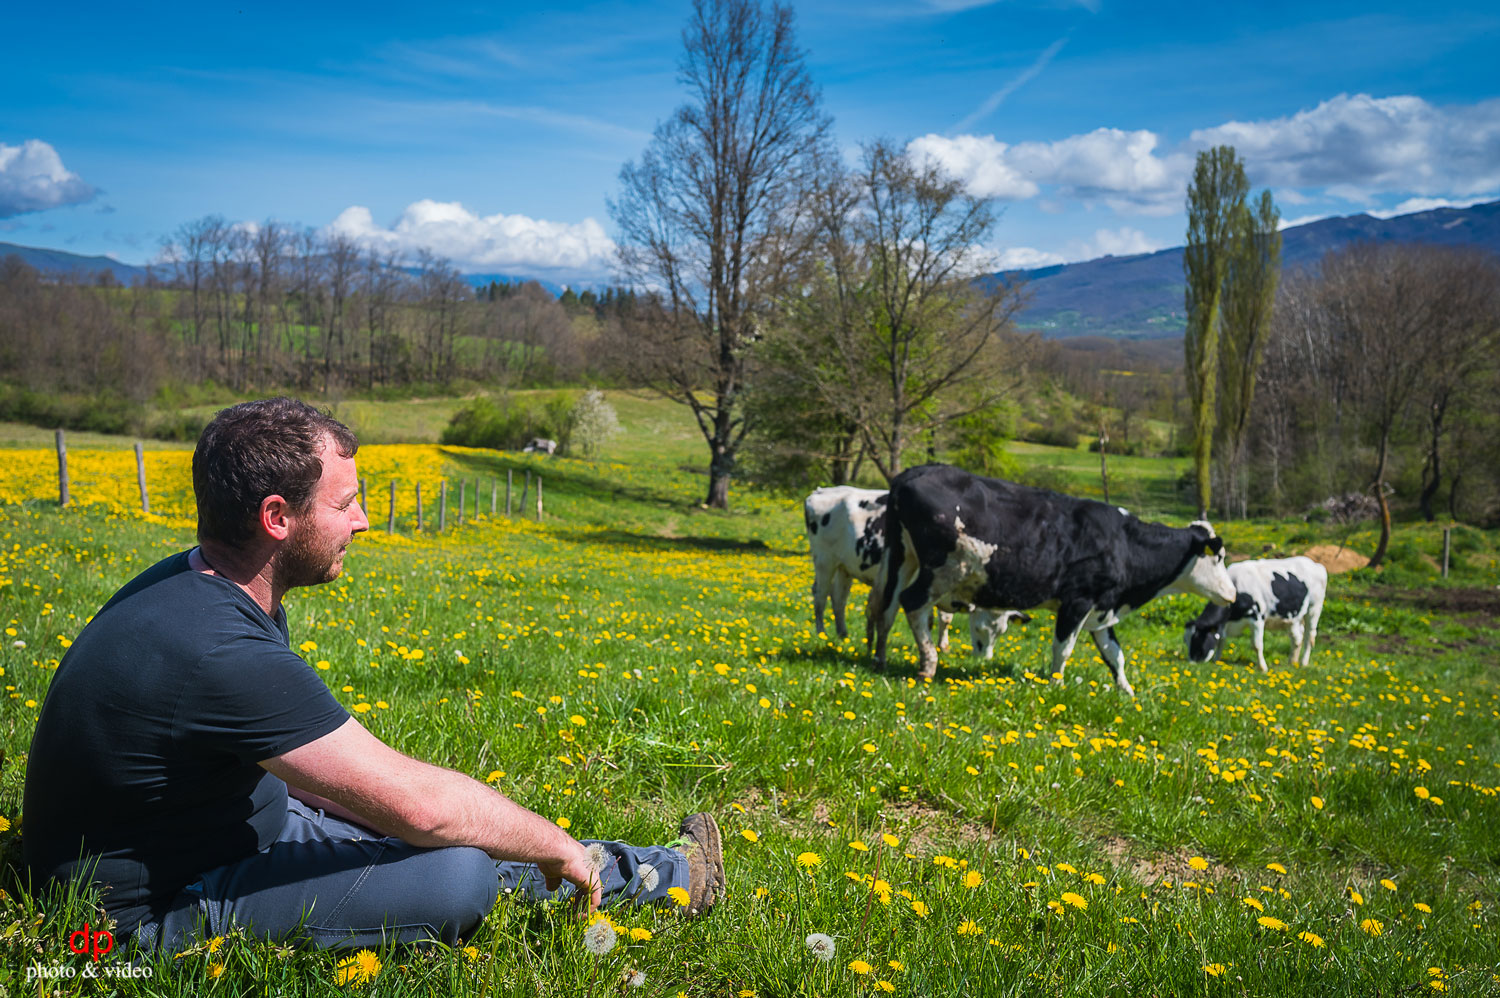 A day in a farm at the foot of Parco Nazionale del Gran Sasso